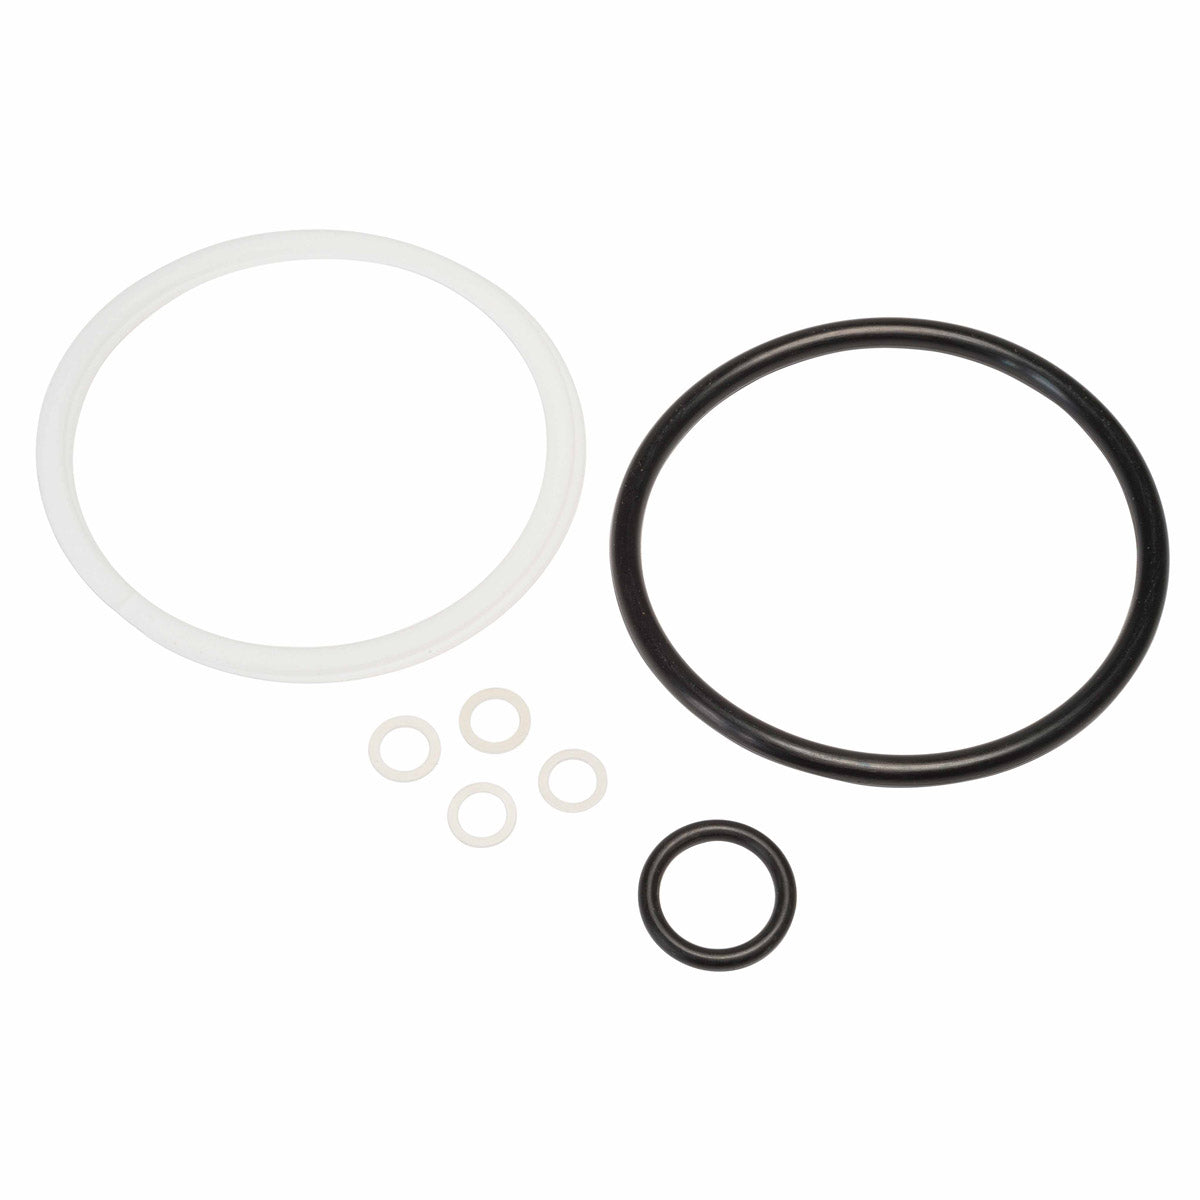 Greenlee 13797 Packing Repair Kit for 884, 885 and 748 Hydraulic Bender